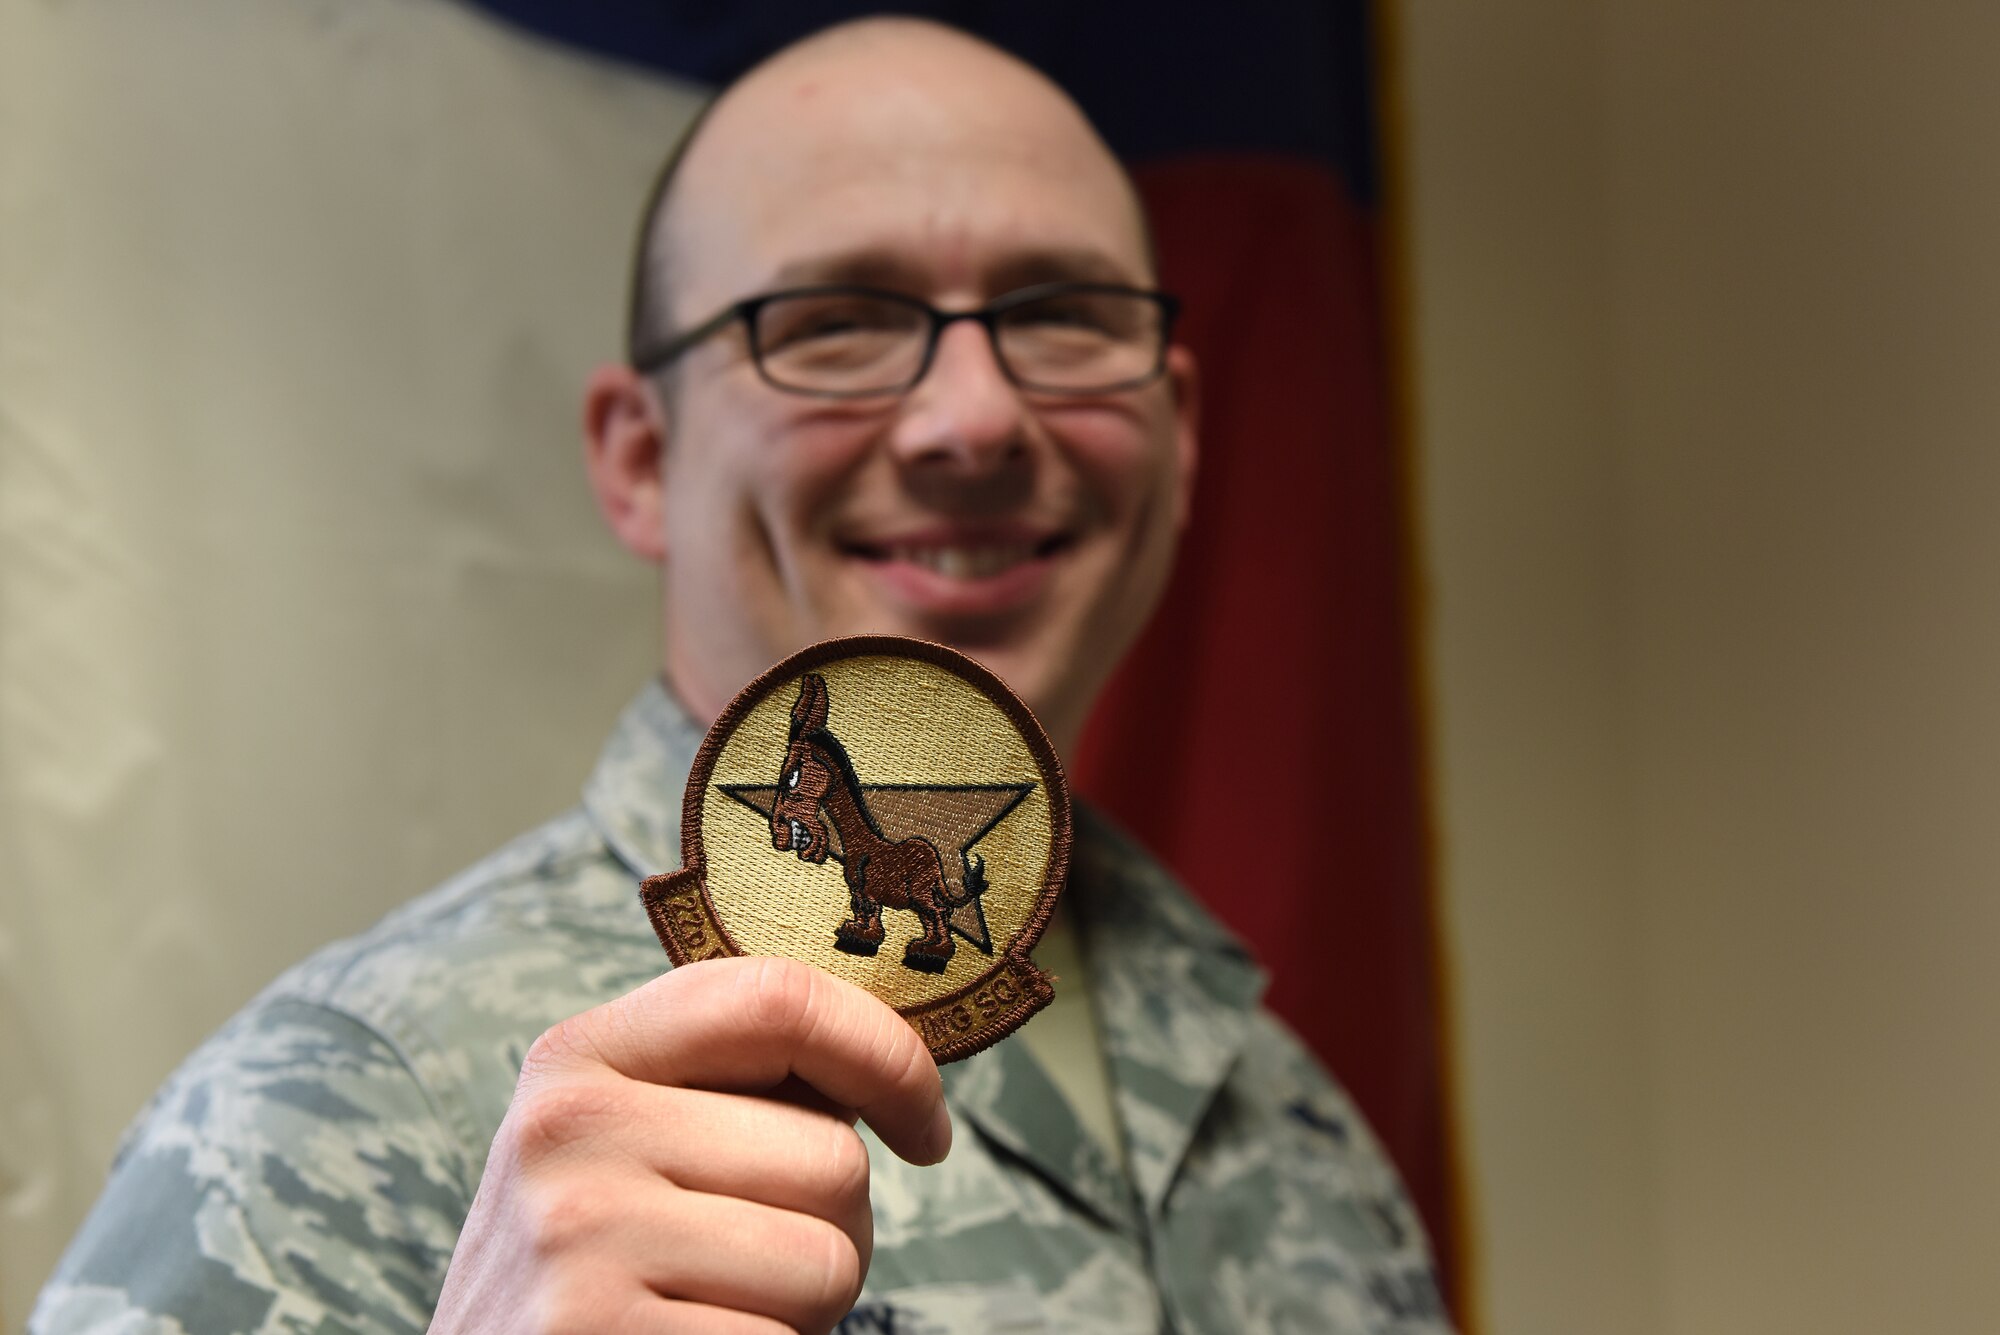 U.S. Air Force Master Sgt. Travis Lacy, 39th Force Support Squadron superintendent of manpower, organization and continuous process improvement, holds a 22nd Expeditionary Air Refueling Squadron patch at Incirlik Air Base, Turkey, June 19, 2018.